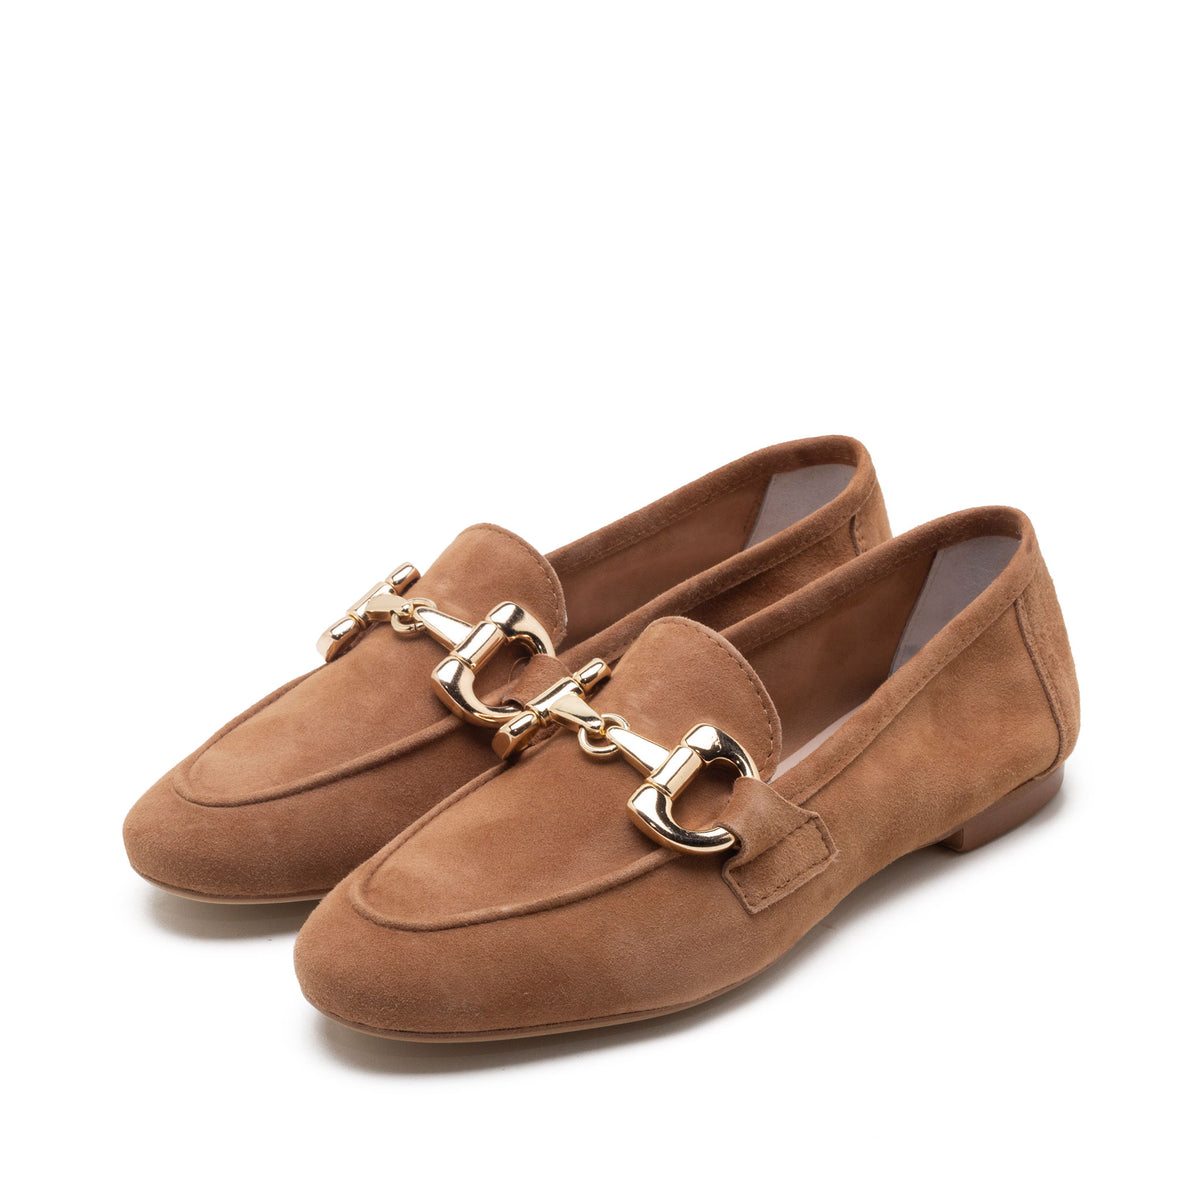 MARZIA LOAFER